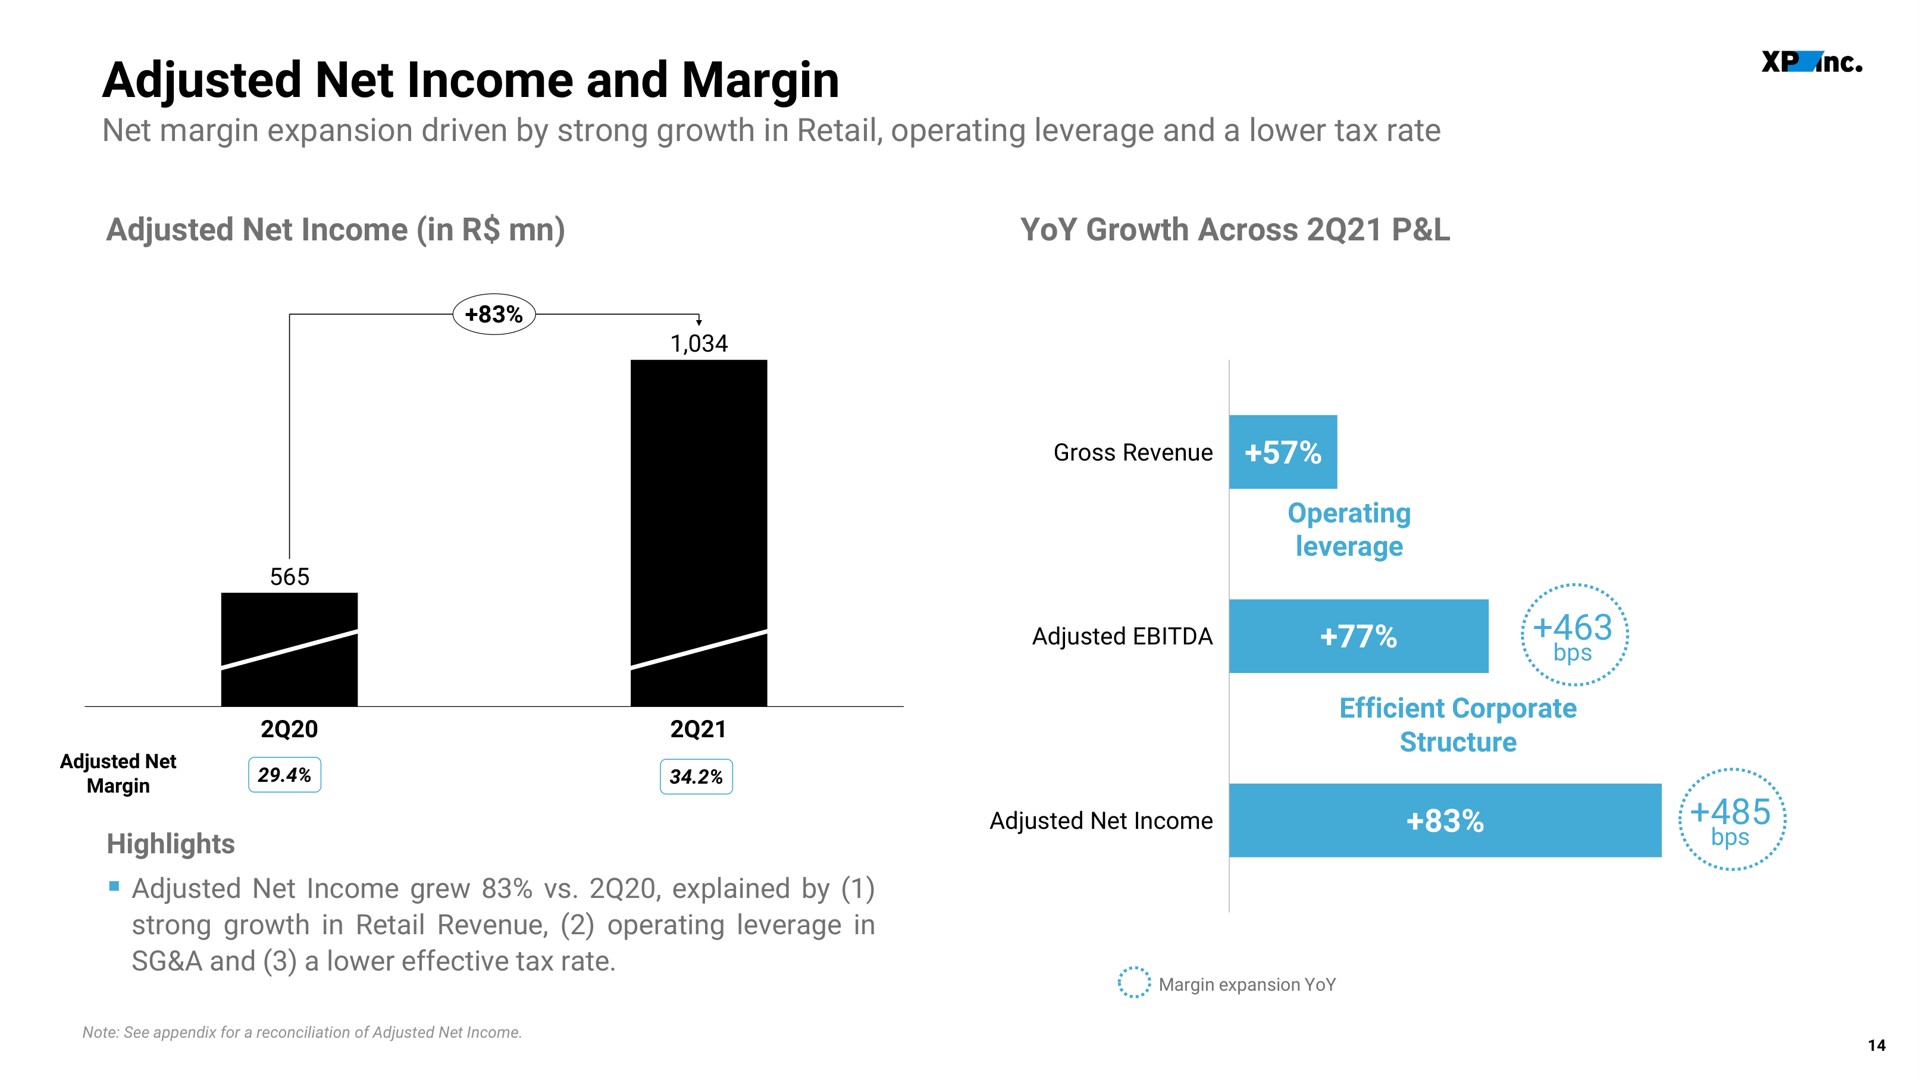 adjusted net income and margin | XP Inc